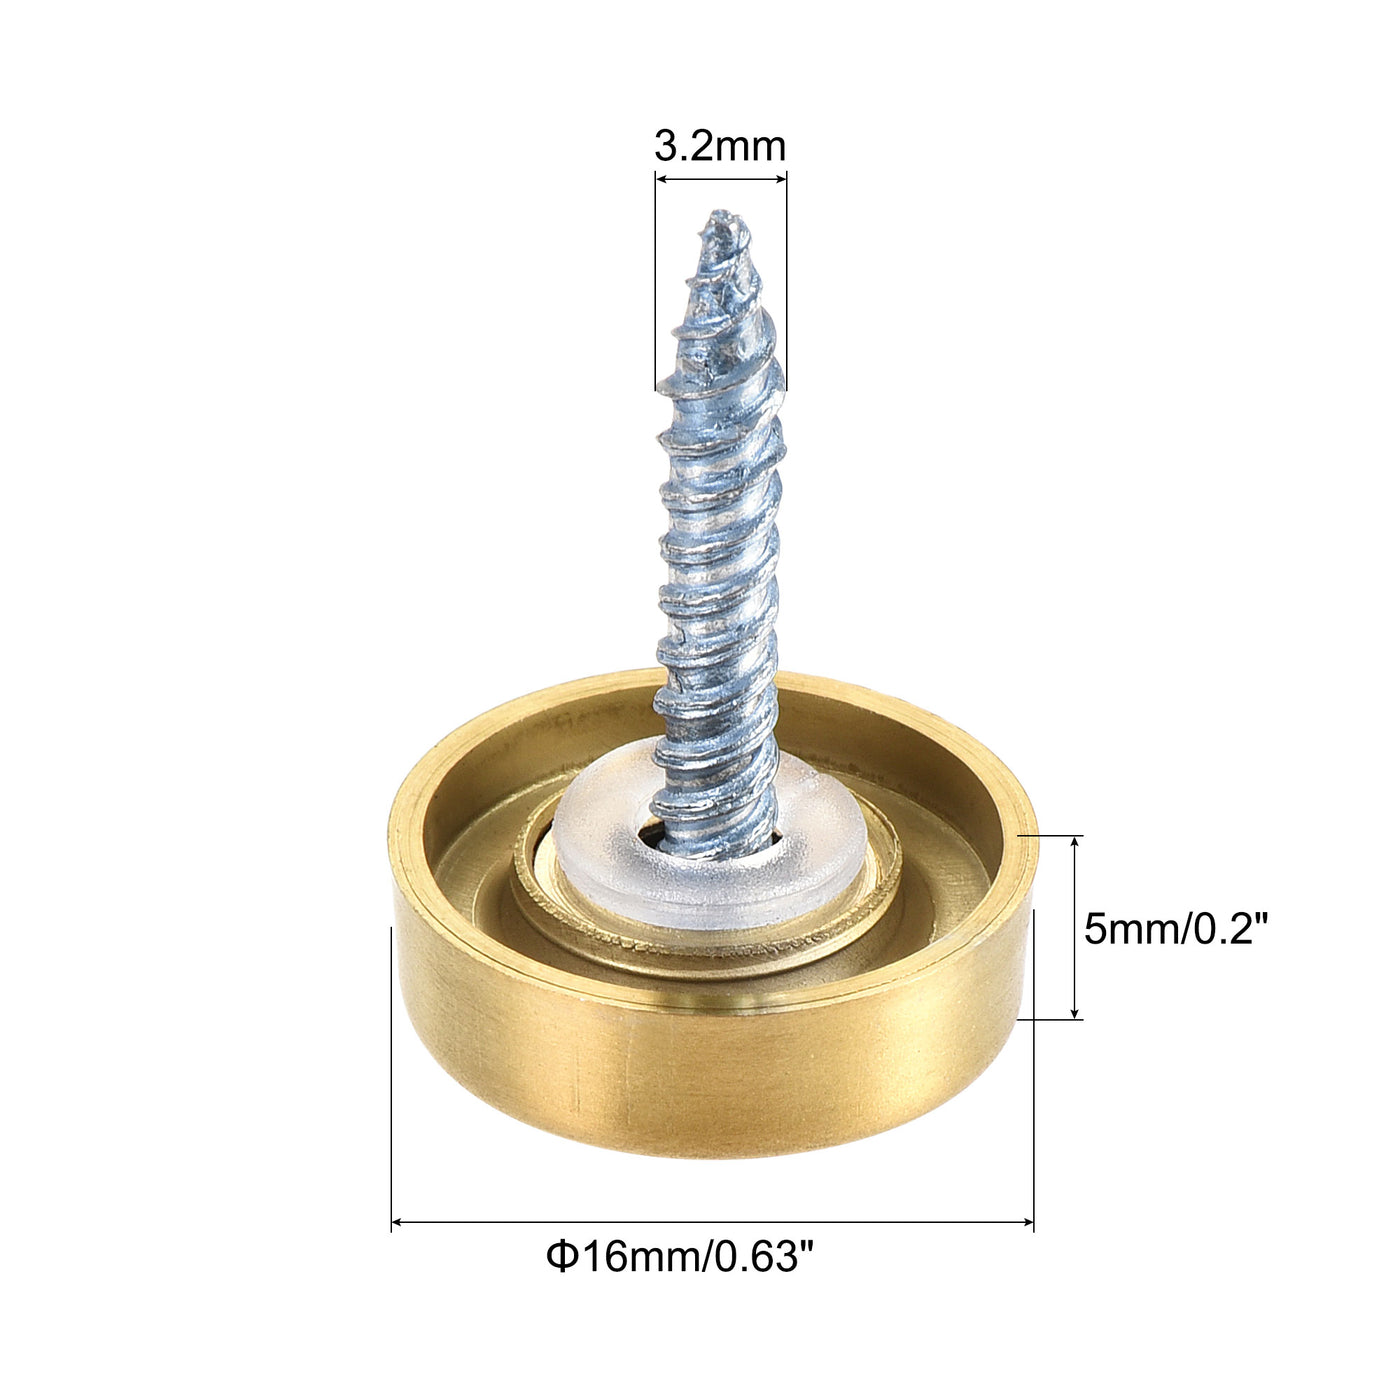 uxcell Uxcell Mirror Screws, 16mm/0.63", 20pcs Decorative Cap Fasteners Cover Nails, Wire Drawing, Gold Tone 304 Stainless Steel